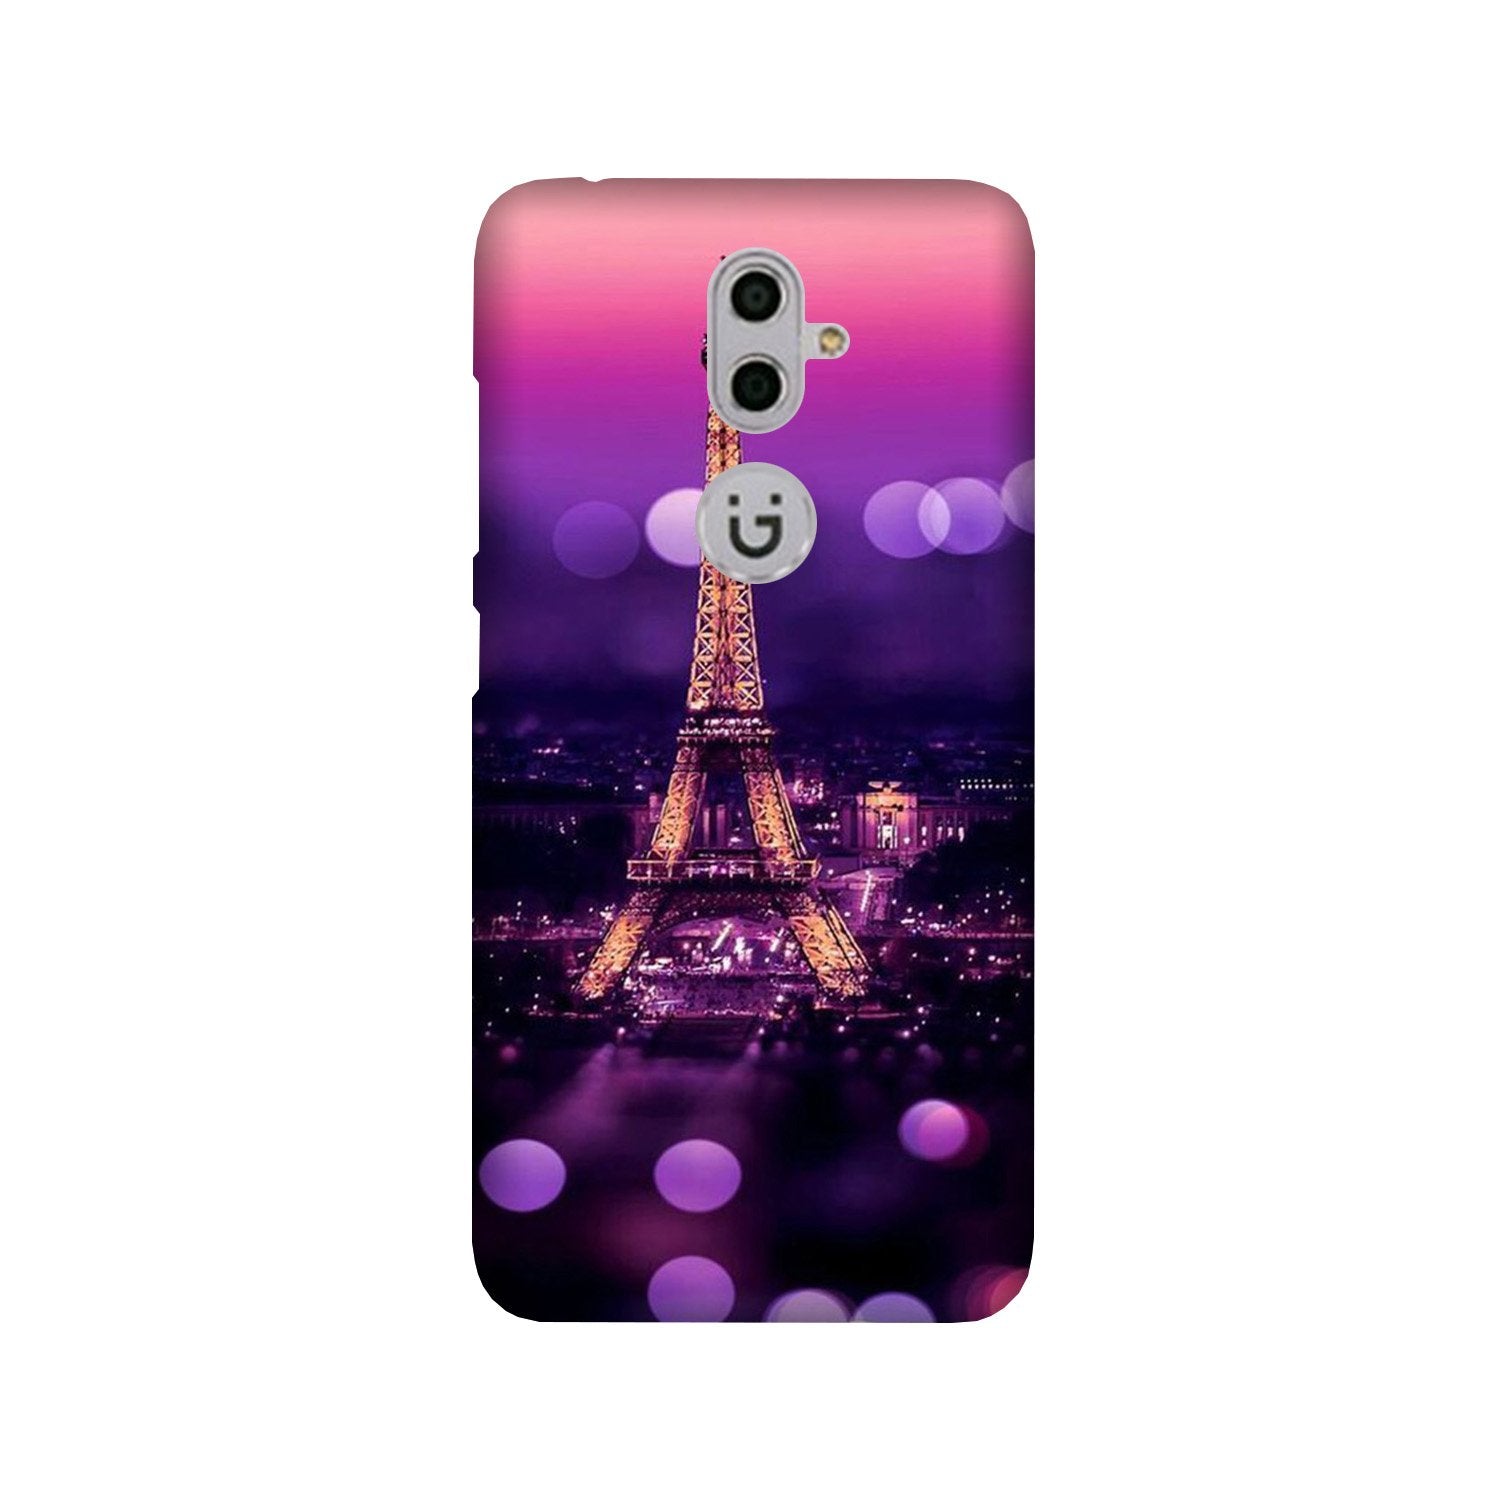 Eiffel Tower Case for Gionee S9